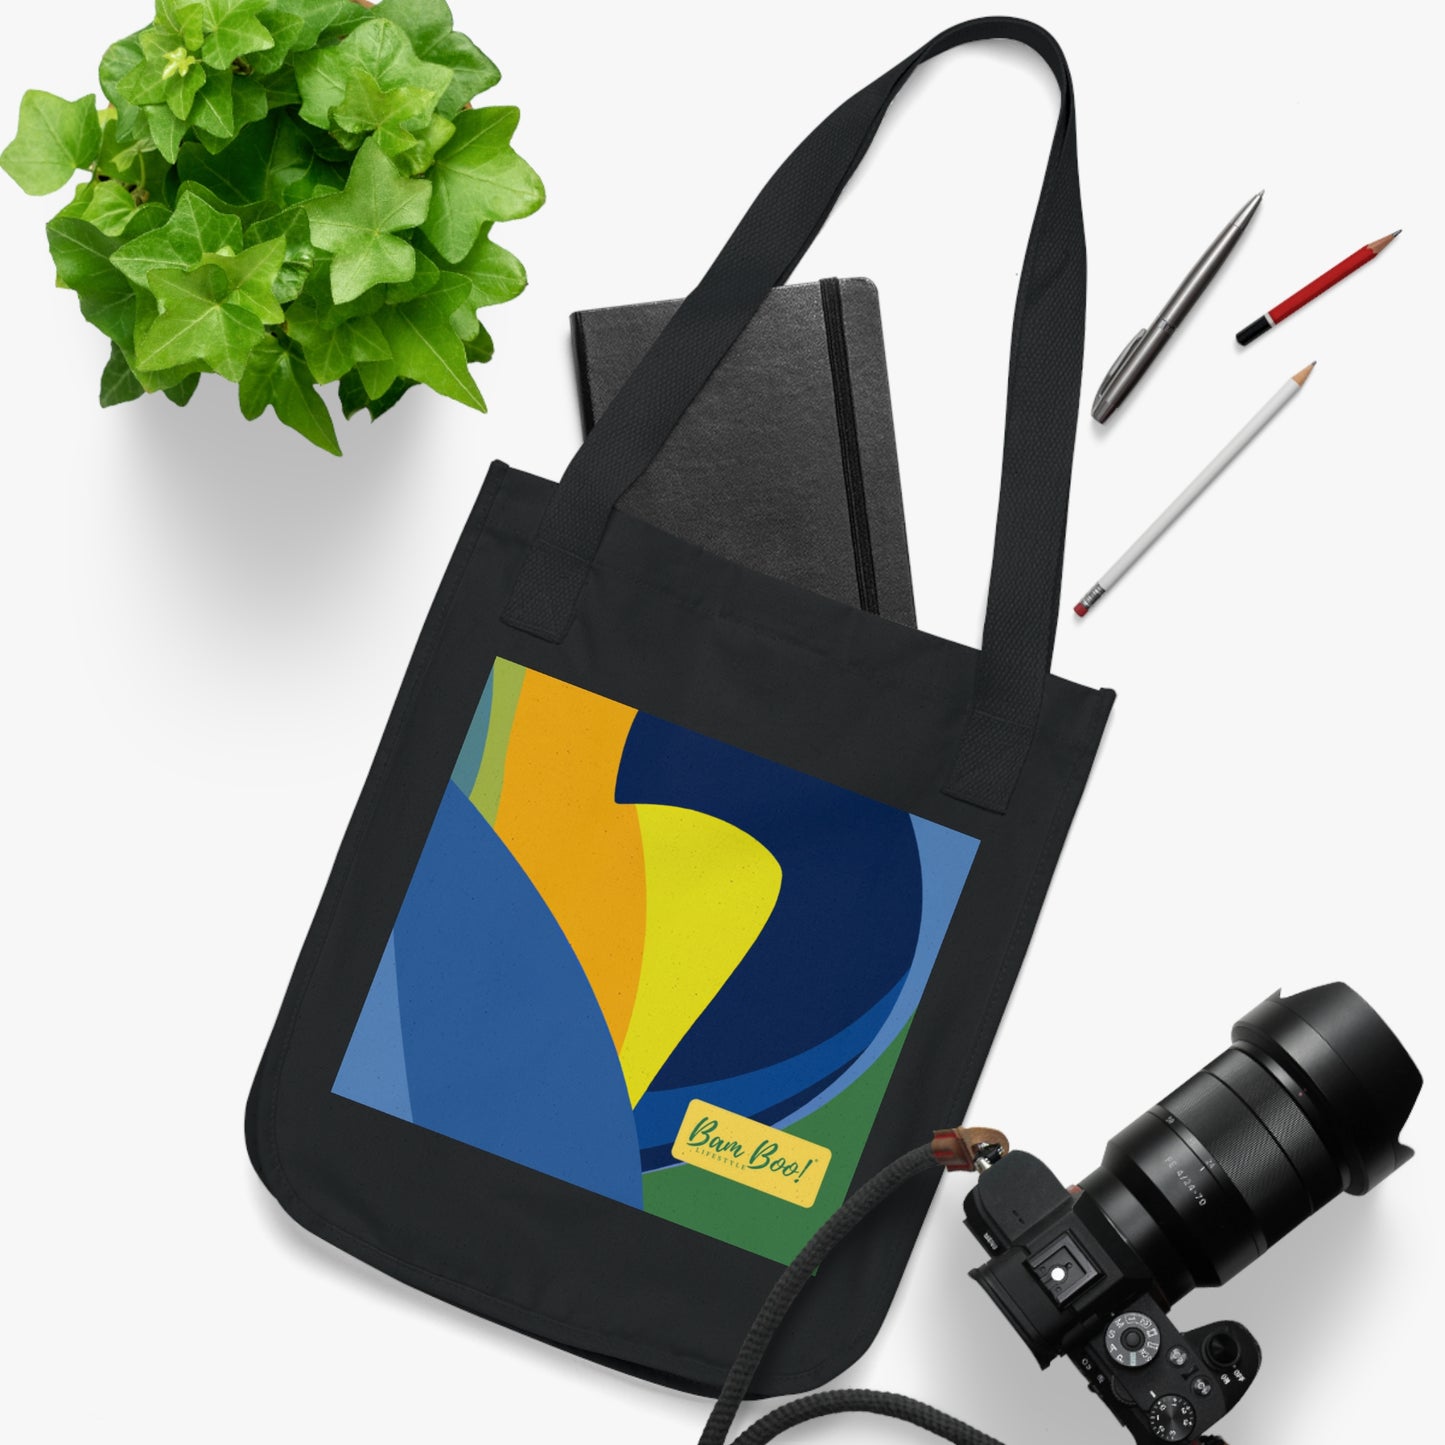 Unsullied Imagery - Bam Boo! Lifestyle Eco-friendly Tote Bag